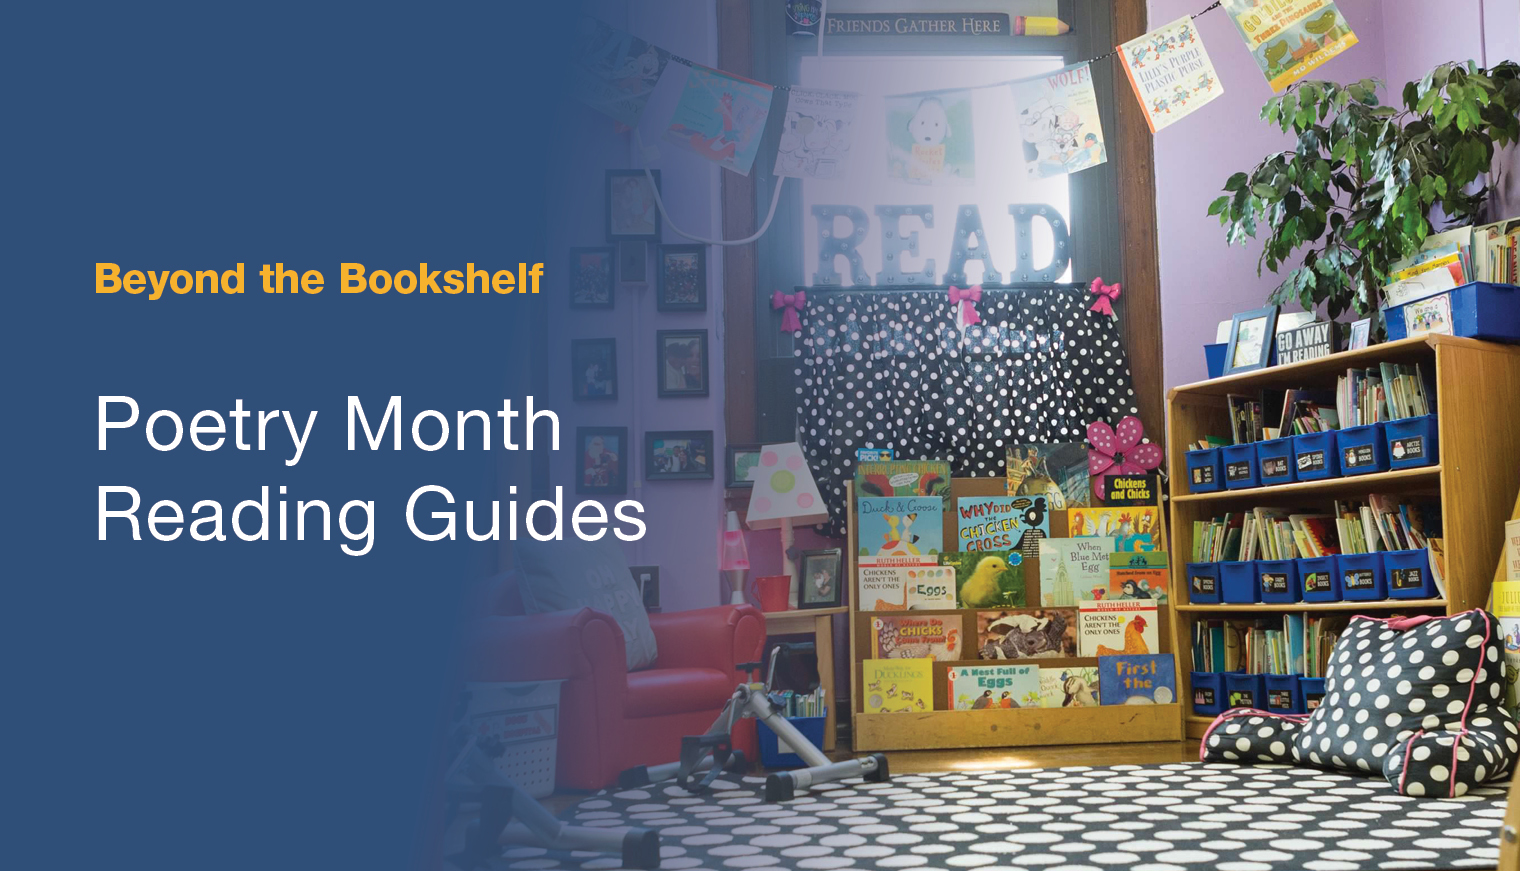 Featured image for “Beyond the Bookshelf – Poetry Month Reading Guides”